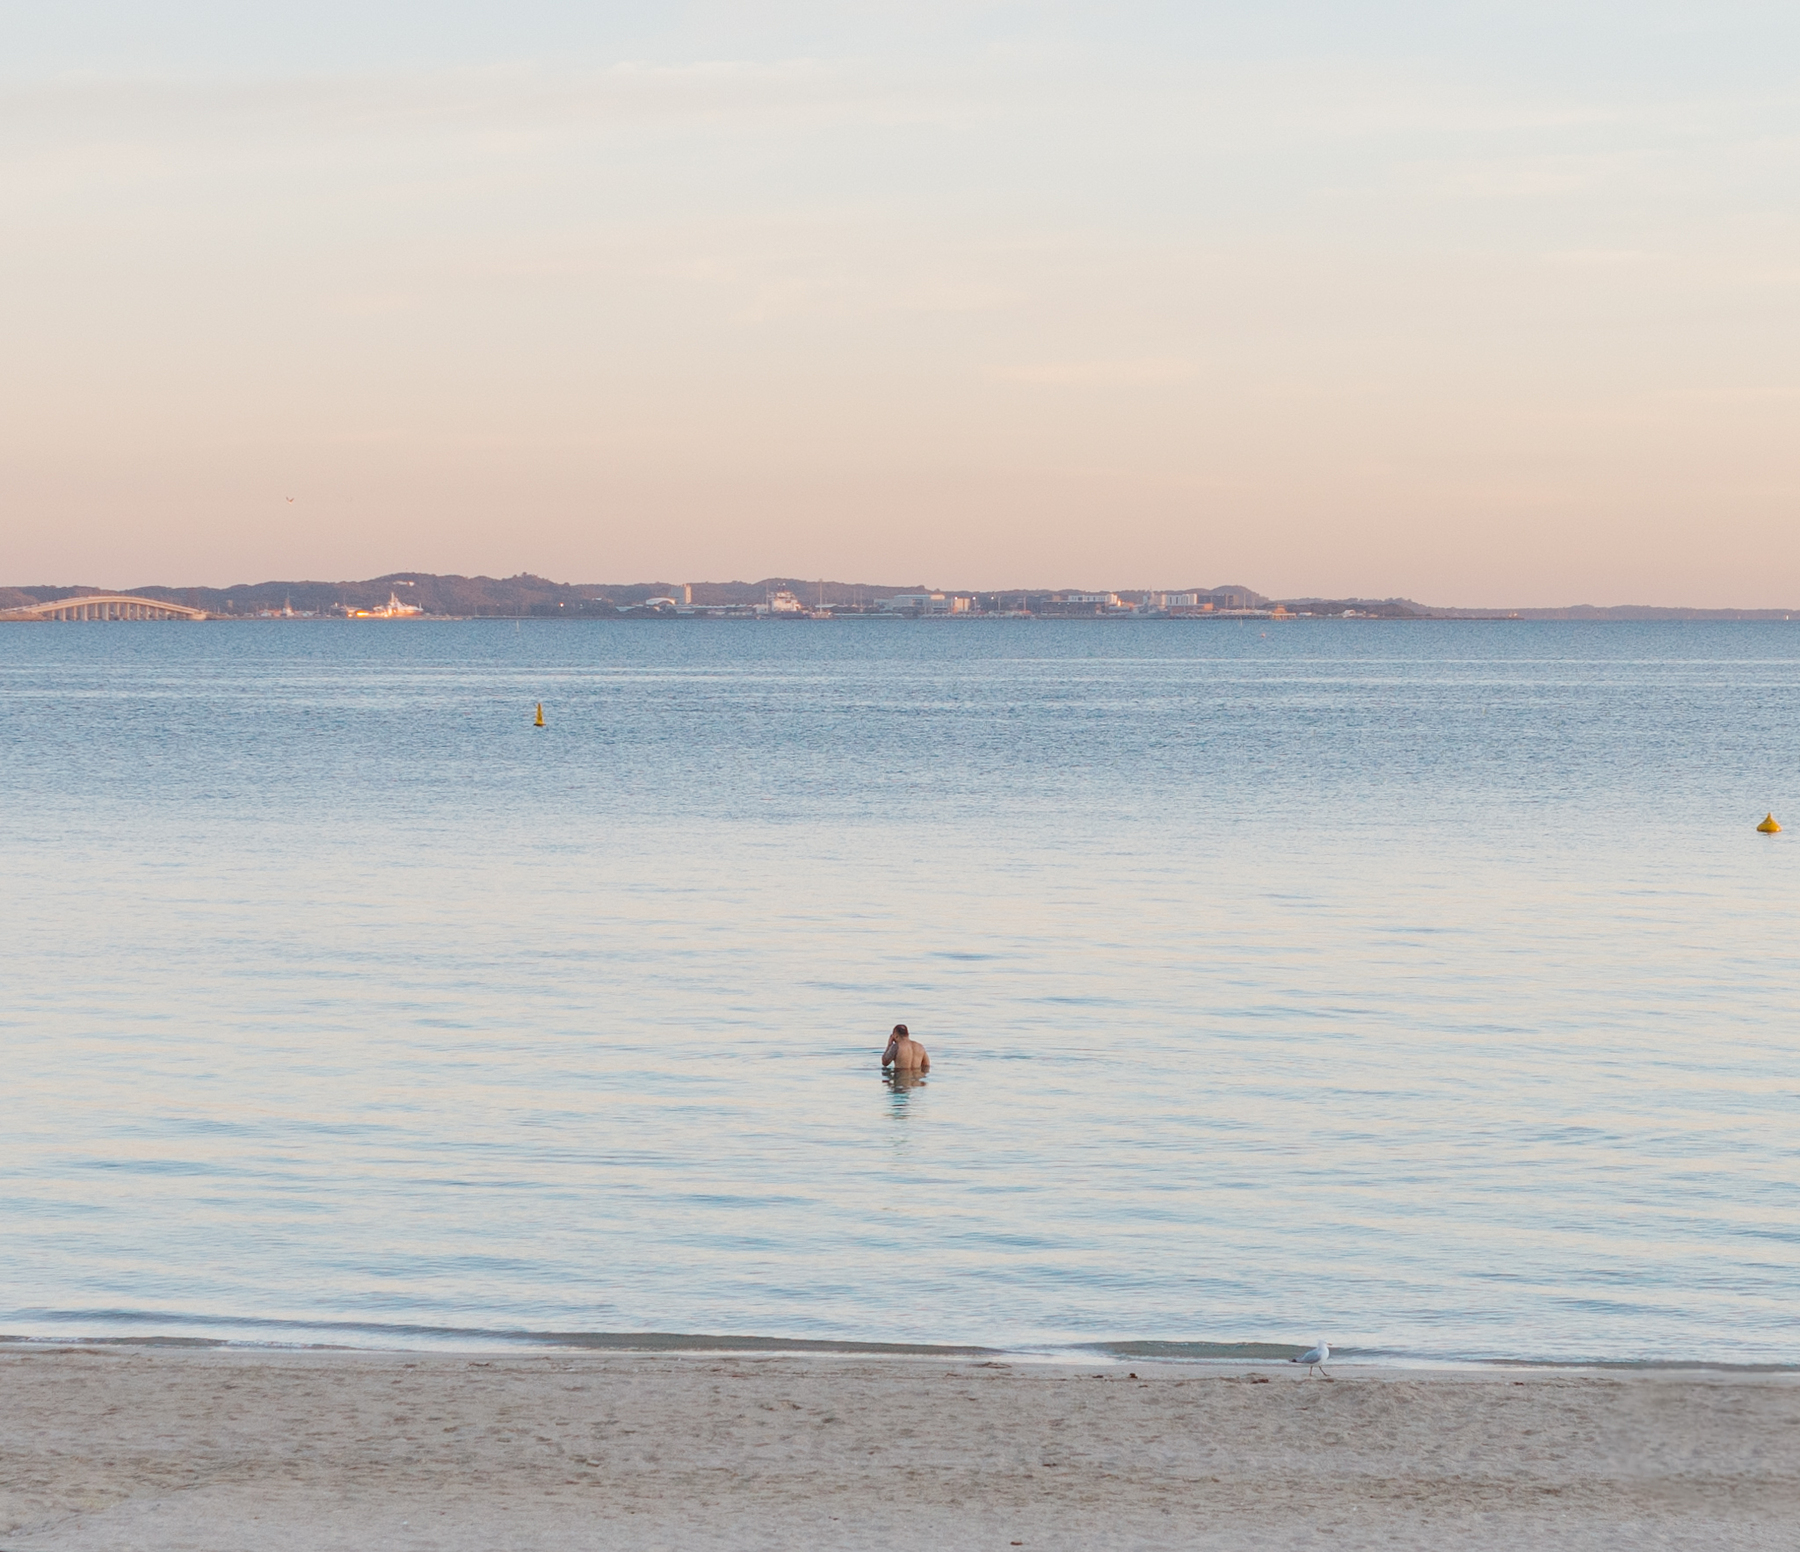 Auto-generated description: A solitary person is wading in calm sea waters near a sandy beach with a landmass visible on the horizon during what appears to be dusk or dawn.